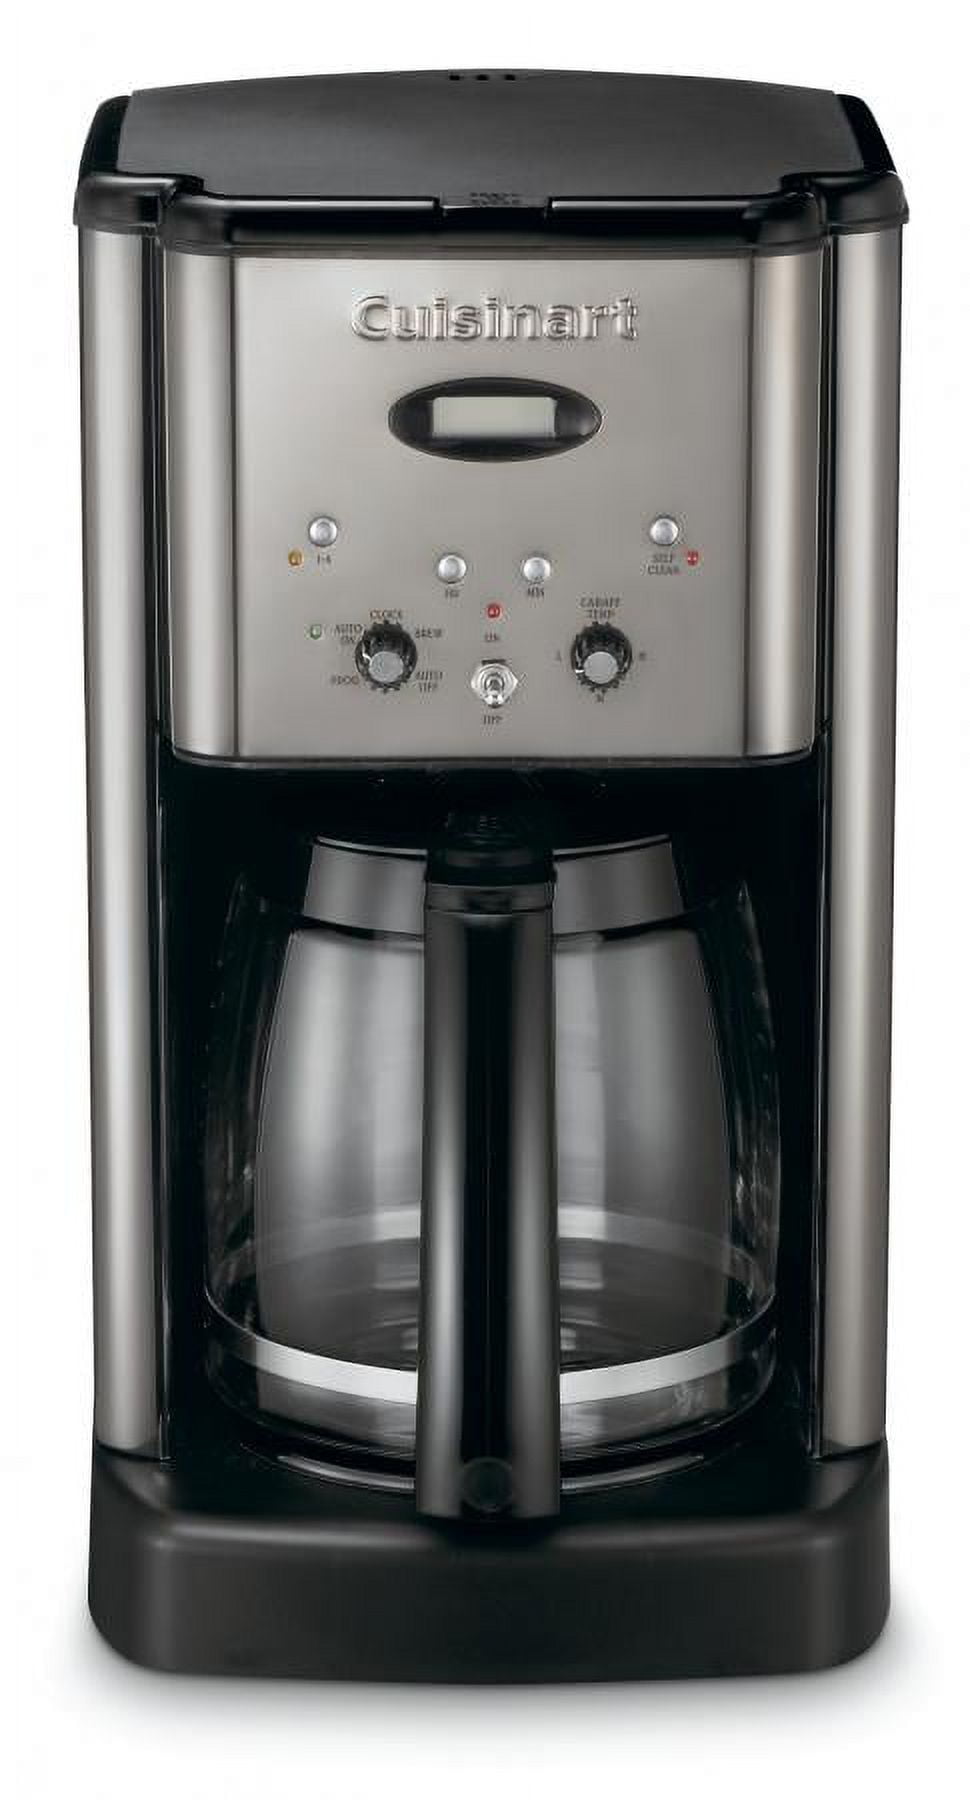 Cuisinart DCC-1200 Brew Central Coffee Maker in Silver – Whole Latte Love